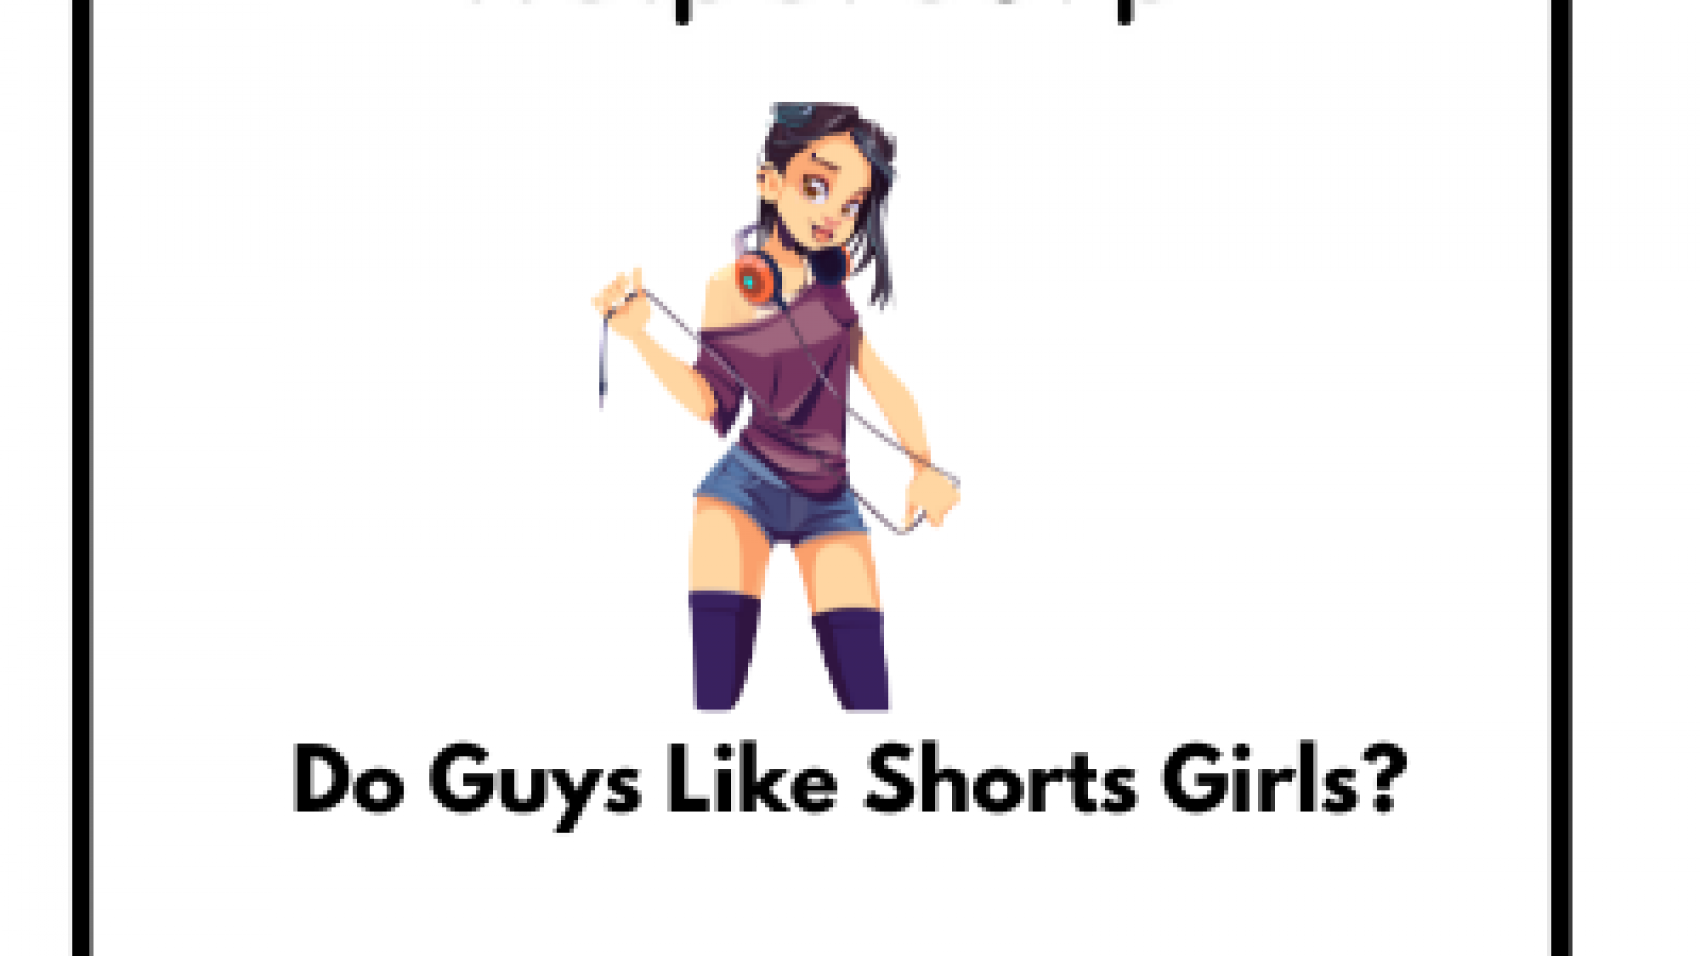 do-guy-like-shorts-girls-featured-iamge-.png